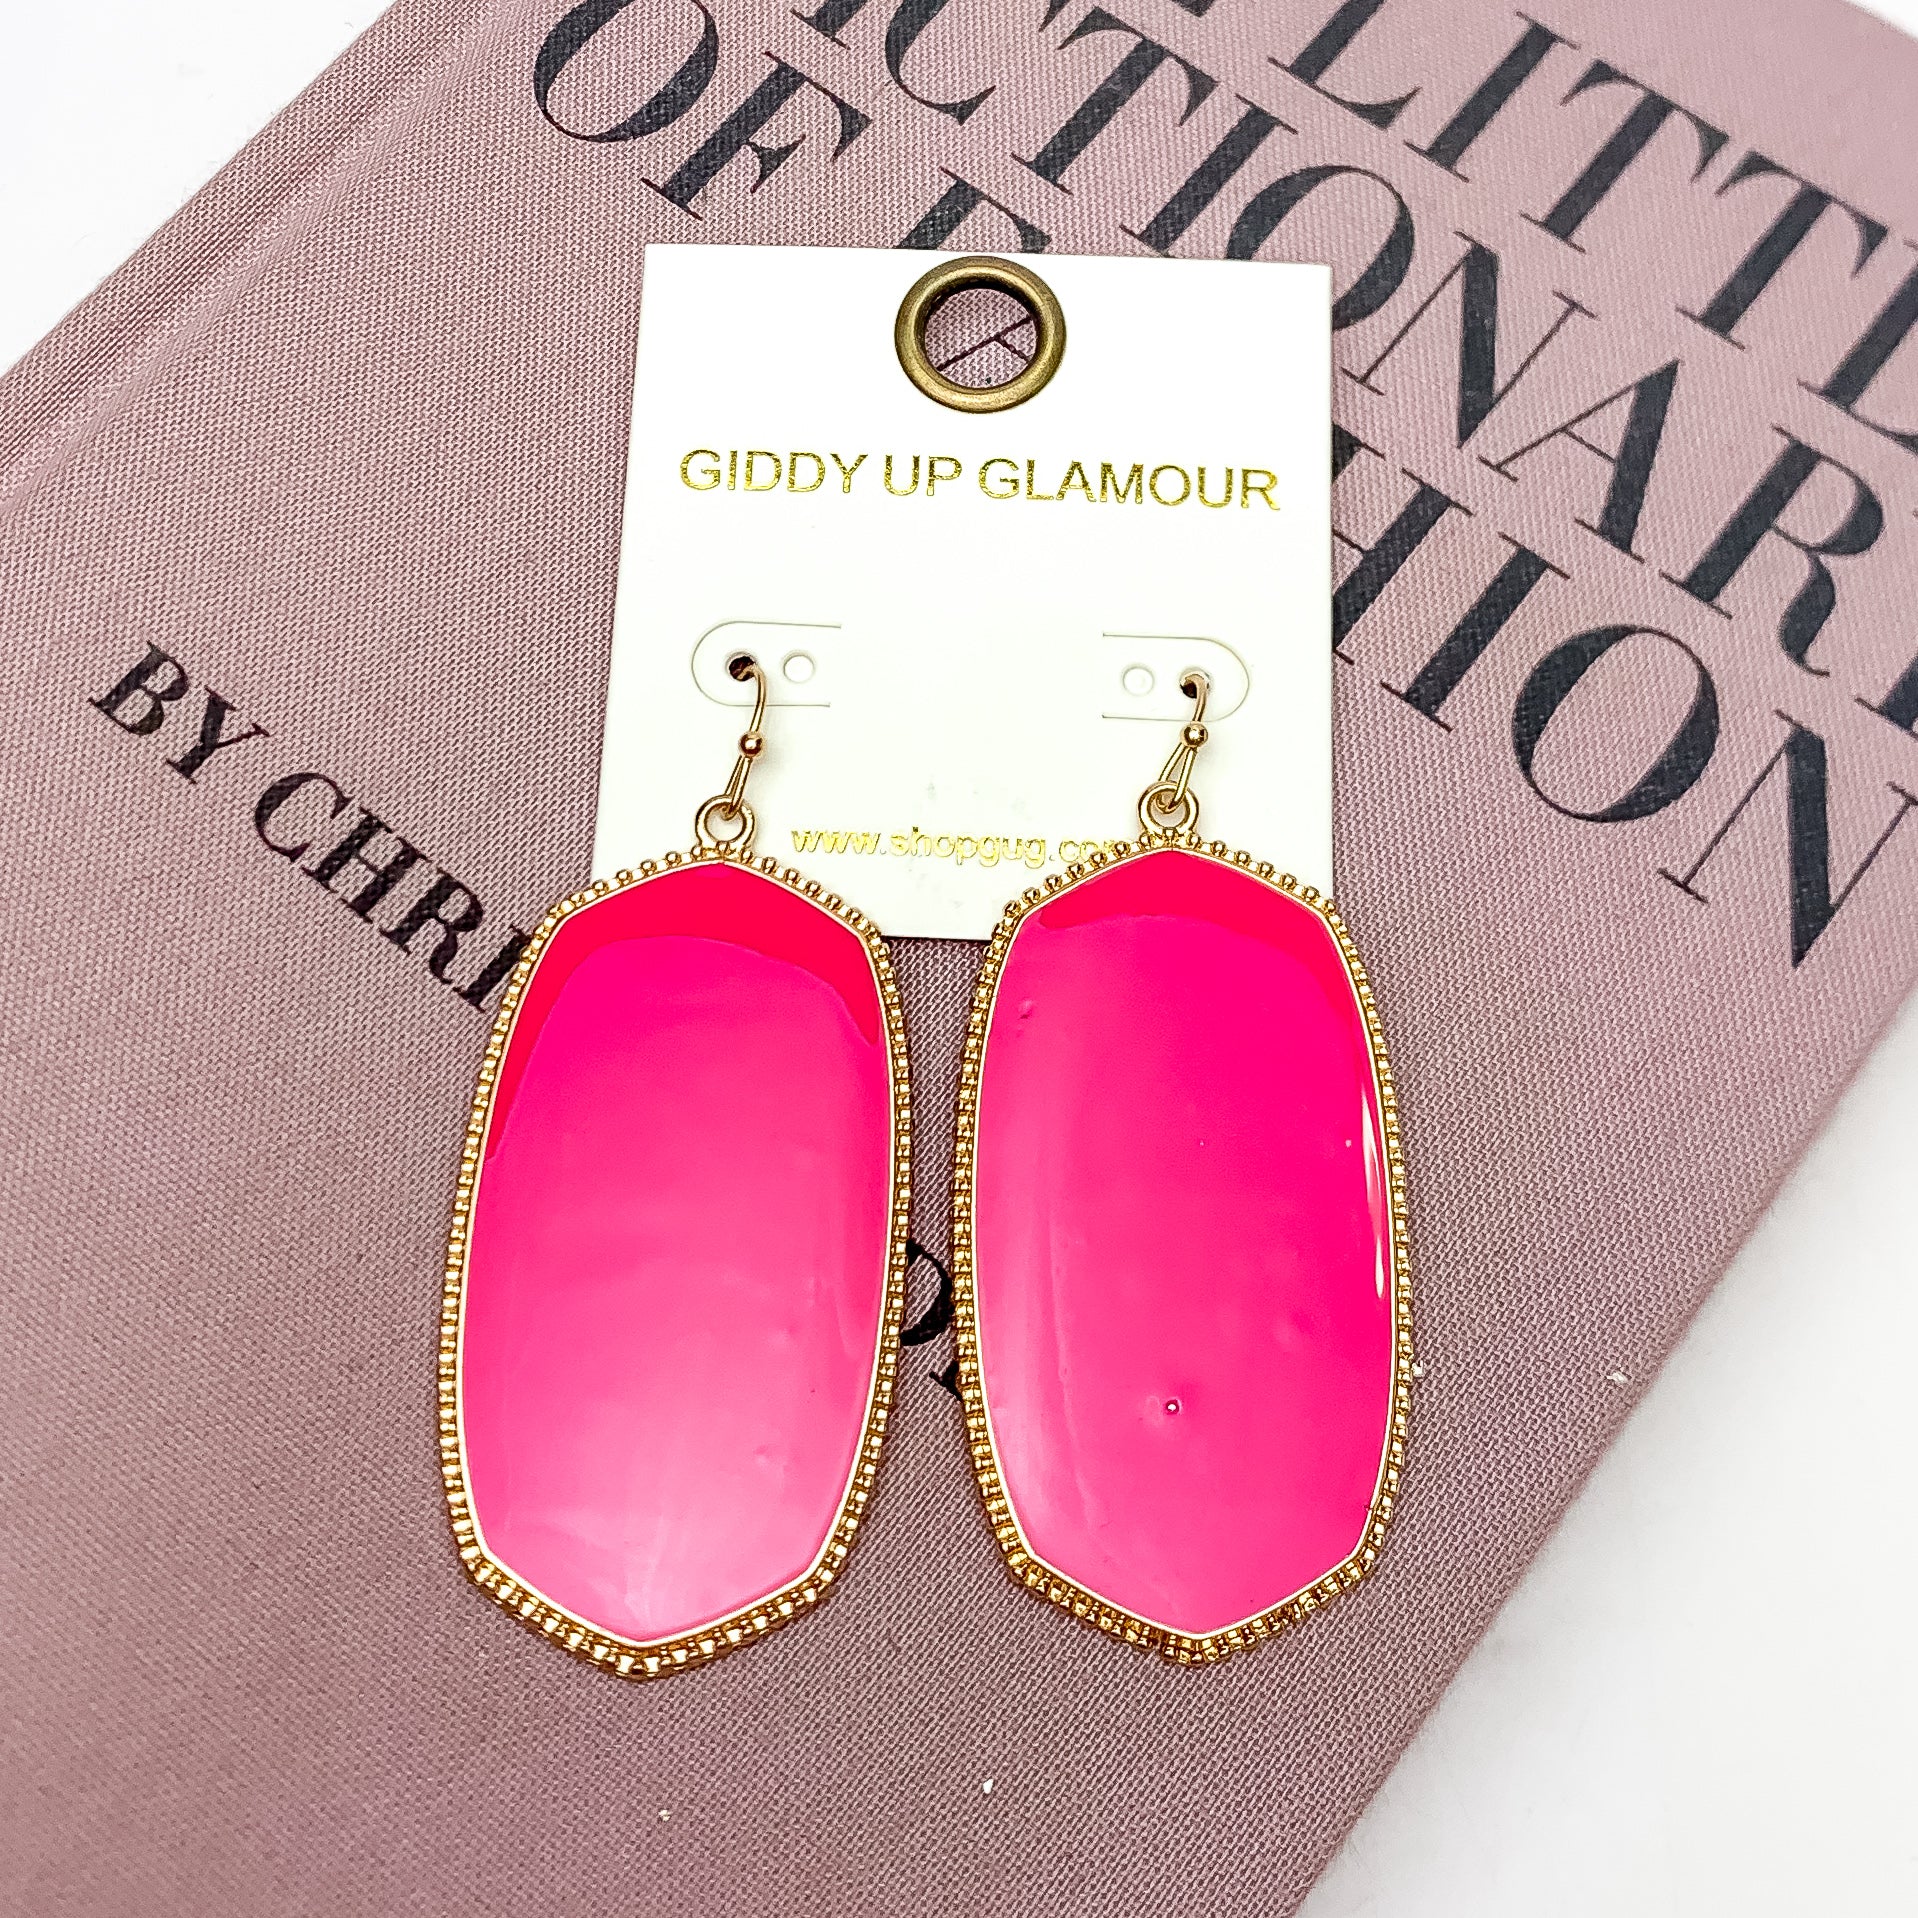 Southern Charm Oval Earrings in Hot Pink. These earrings are laying on a pink book with a white background behind the book.